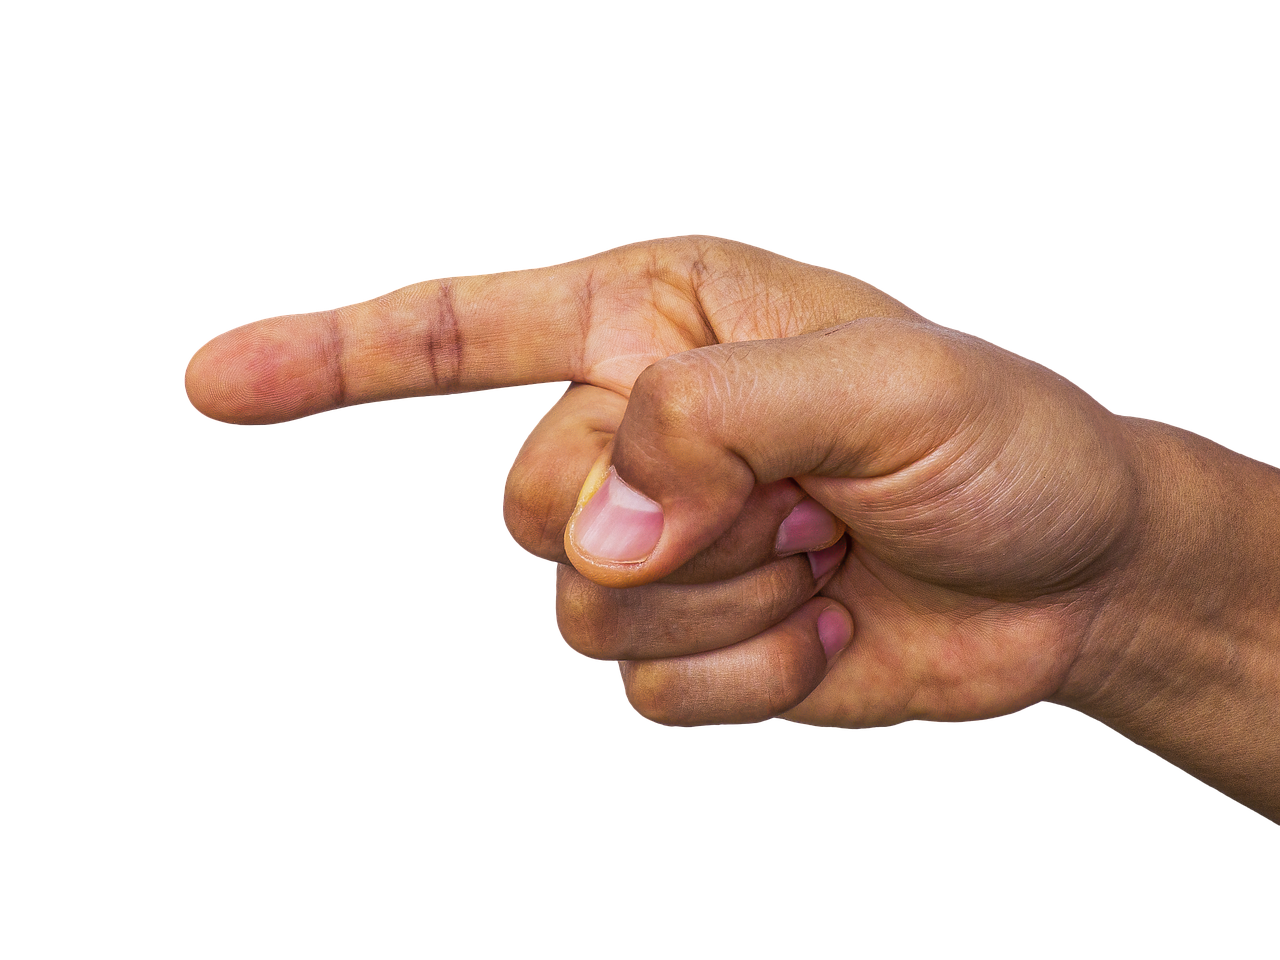 a close up of a person pointing a finger, a stock photo, by Jan Rustem, realism, epicanthal fold, disjoint haphazard, on black background, anjali mudra